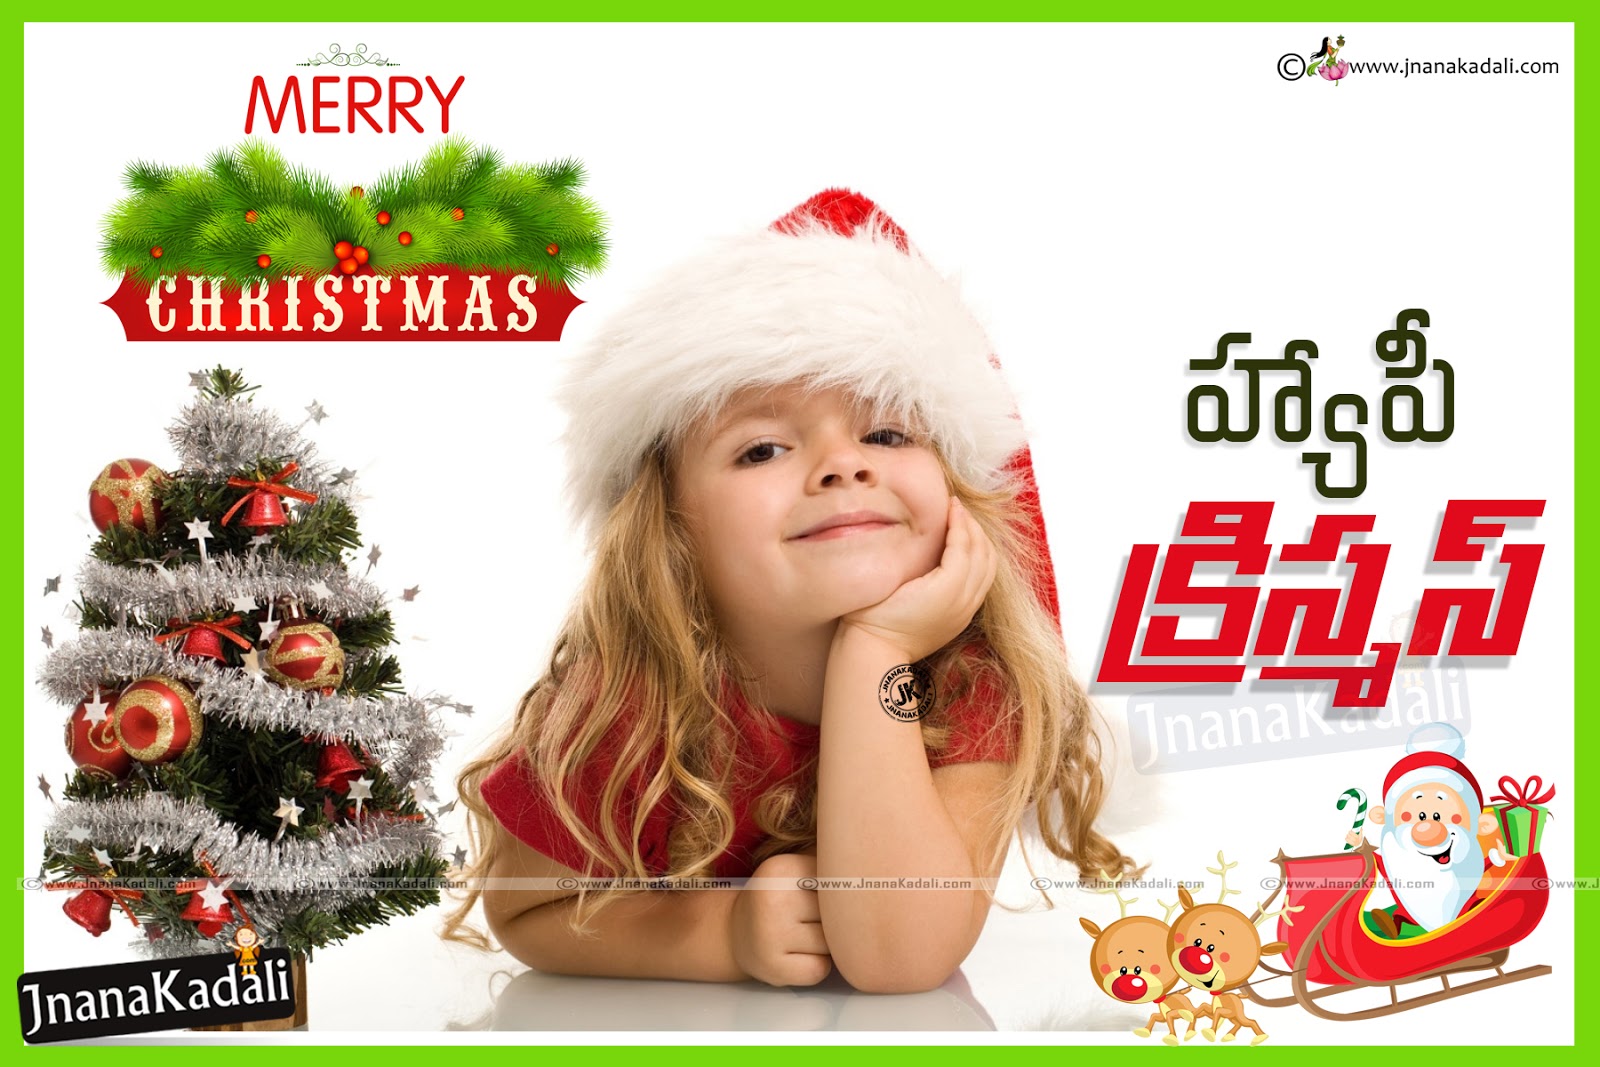 Happy Christmas Telugu Greetings-2016 Christmas Wishes Quotes in ...